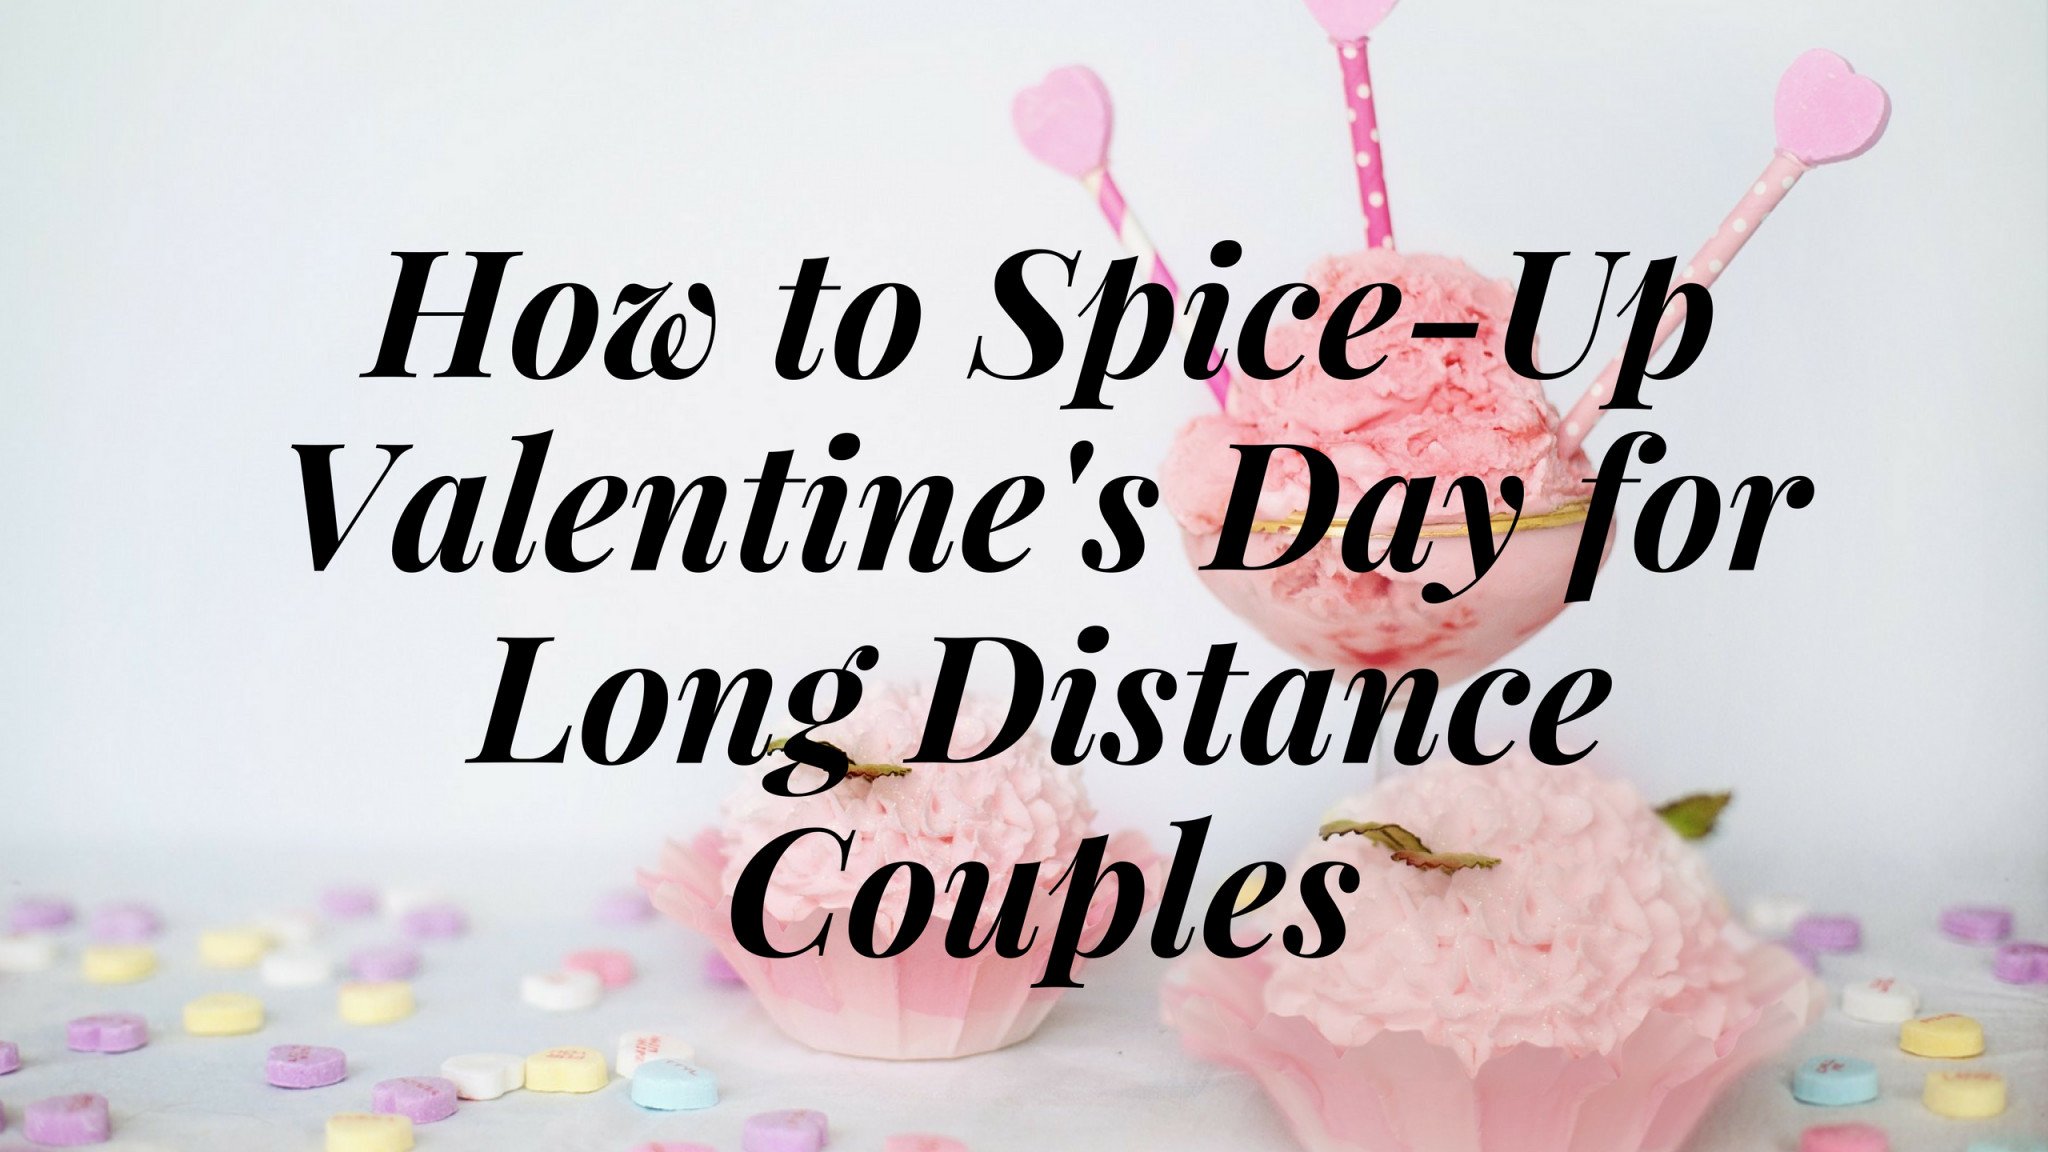 Long Distance Relationship Valentines Day Ideas
 How to Spice Up Valentines Day for Long Distance Couples